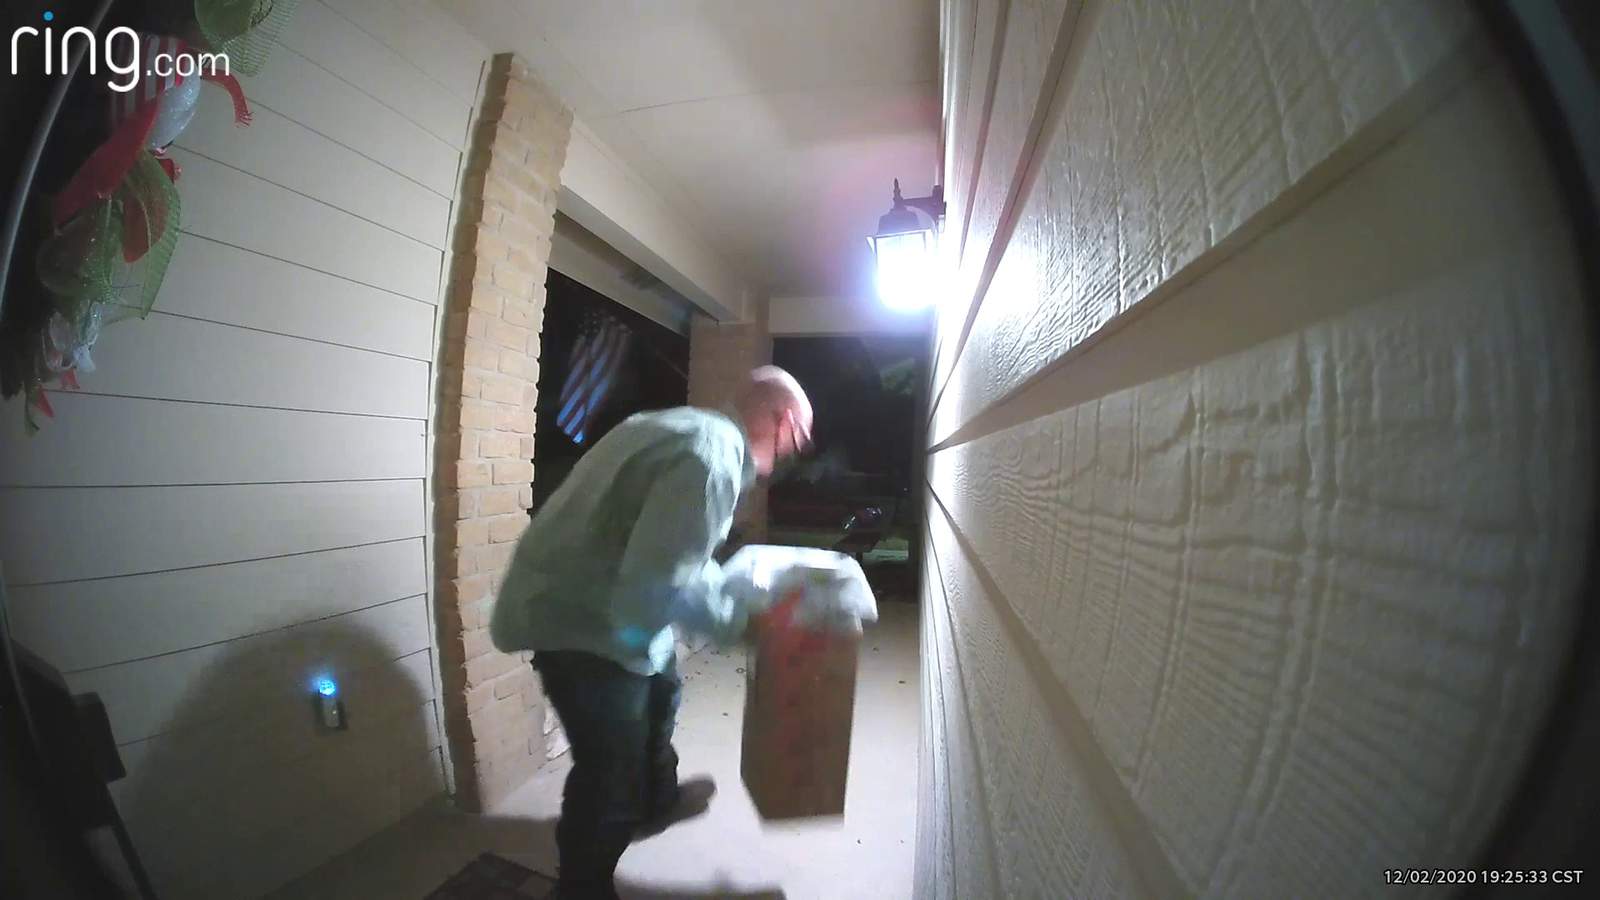 Alleged porch pirate caught on video stealing packages in Live Oak